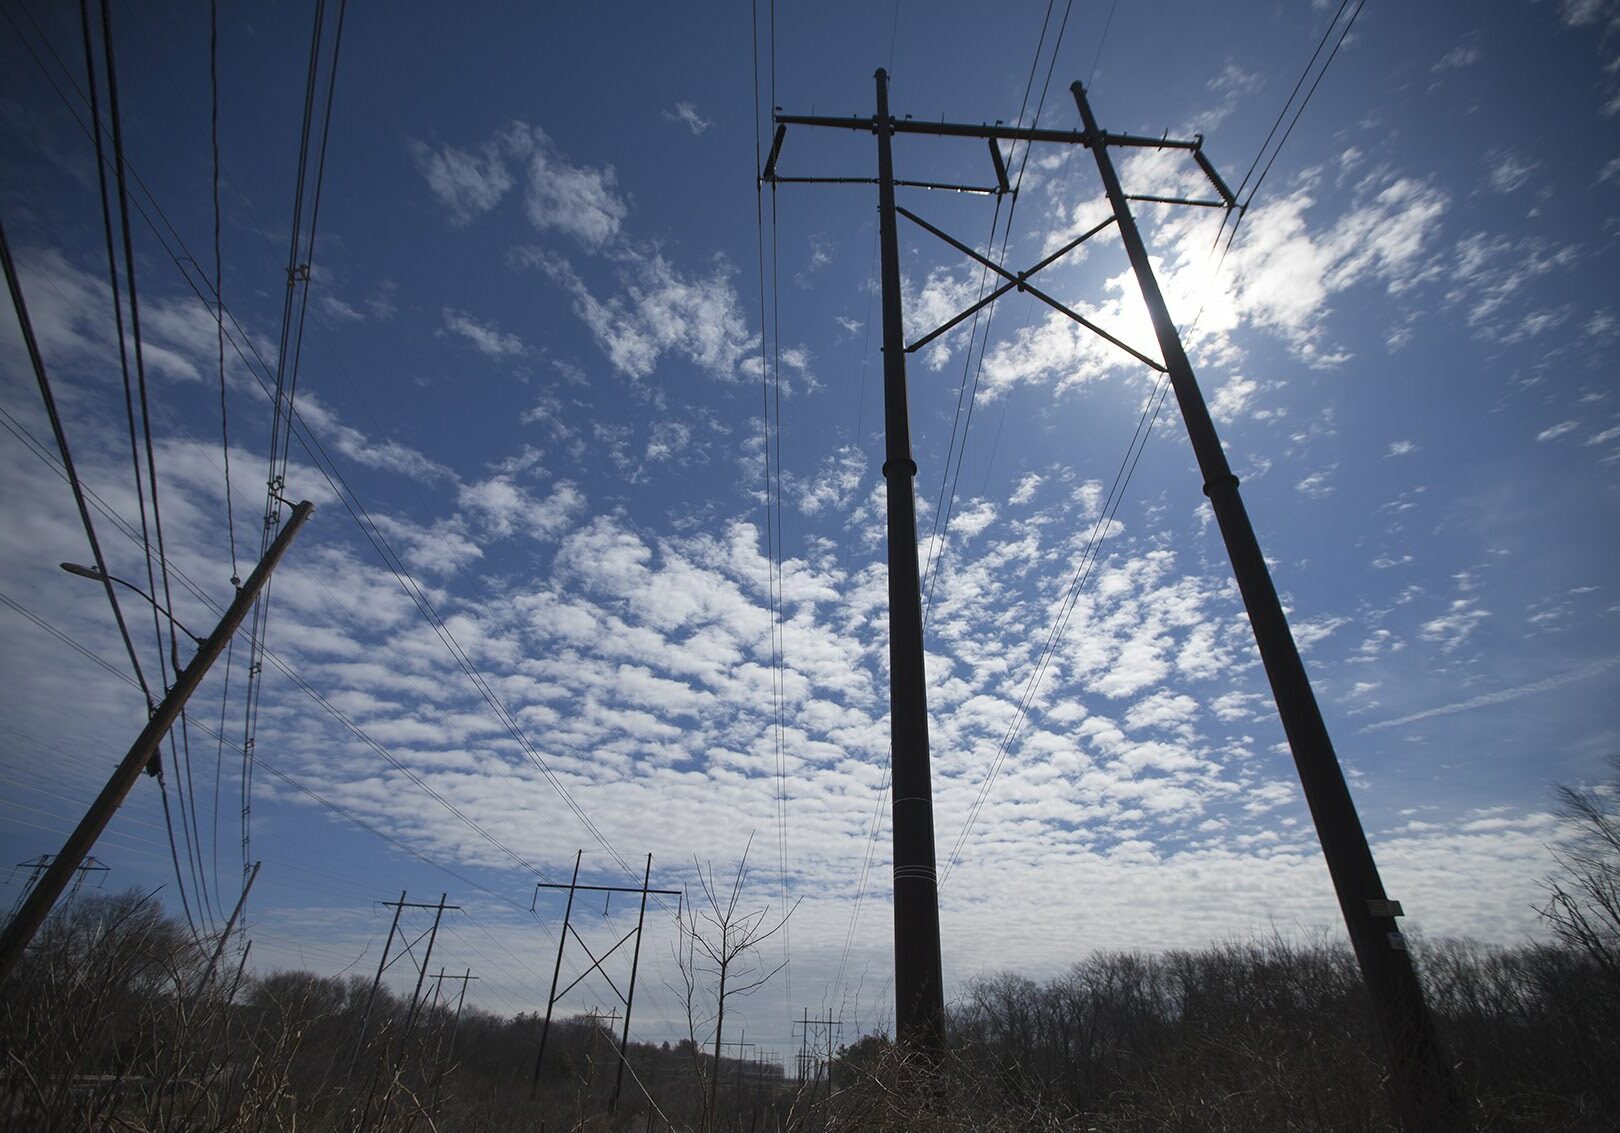 Powerlines in Medway, MA. Photo by Jesse Costa for WBUR